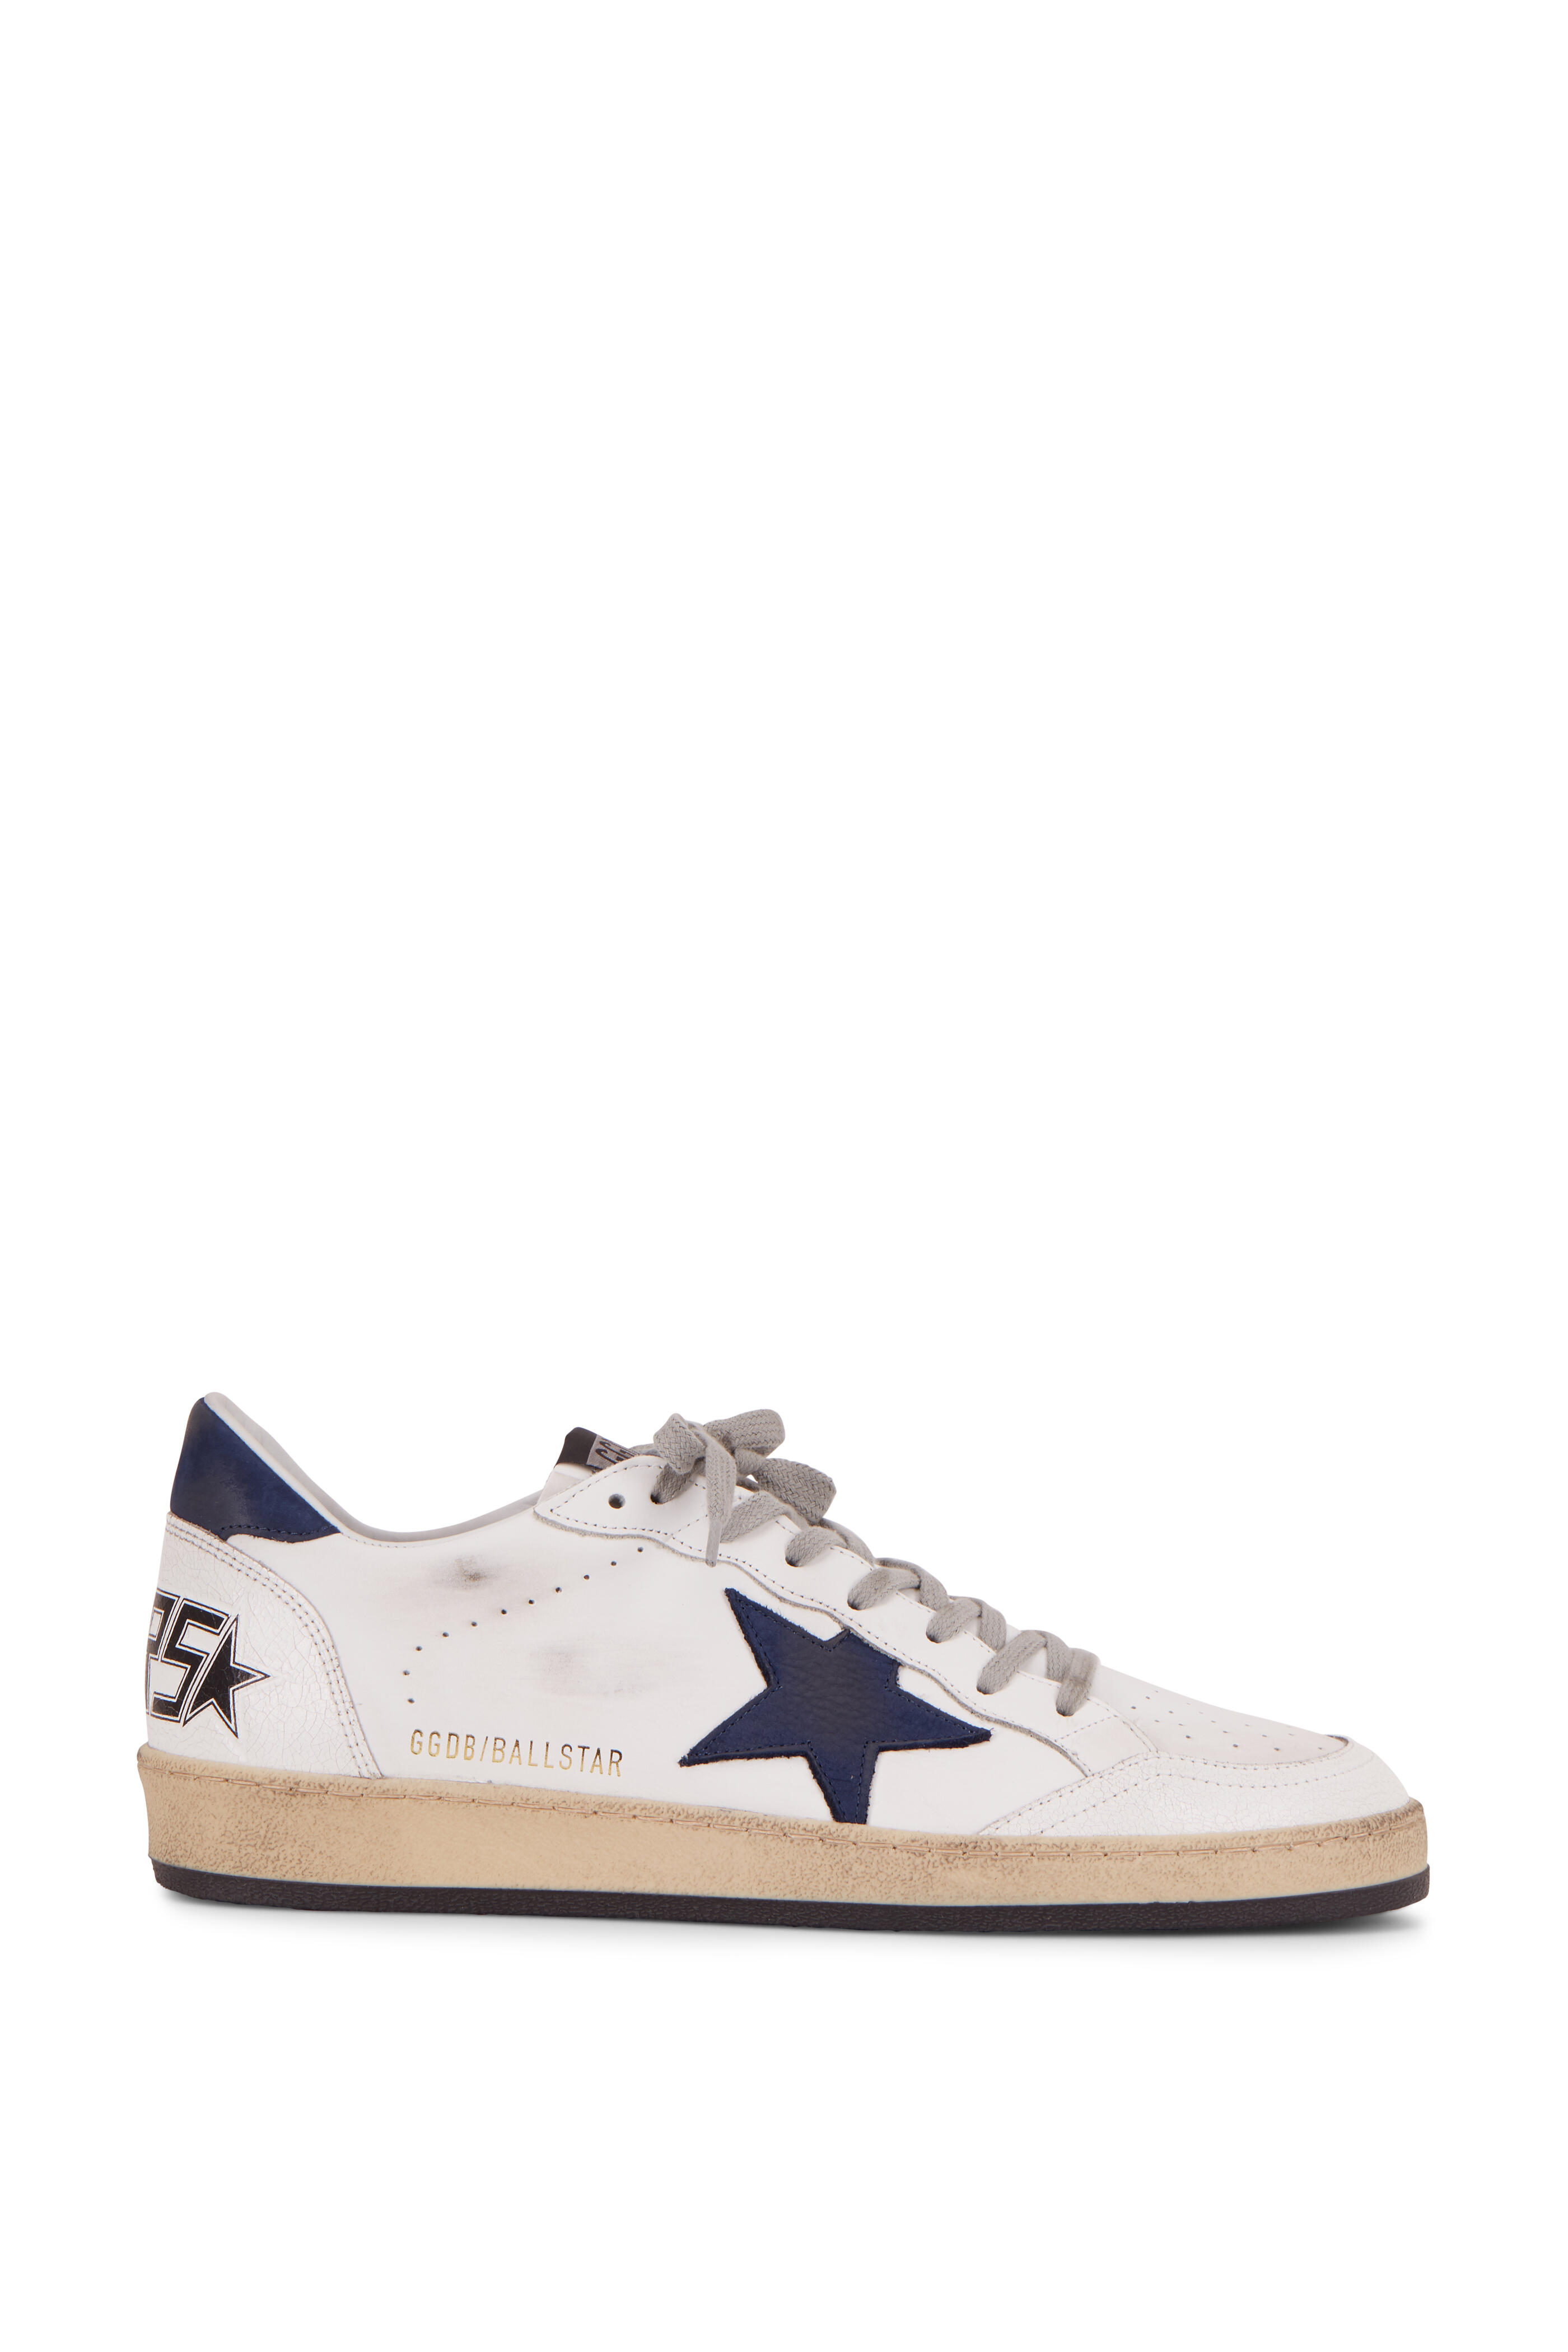 Golden Goose - Ball Star White Leather Blue Suede Star Sneaker